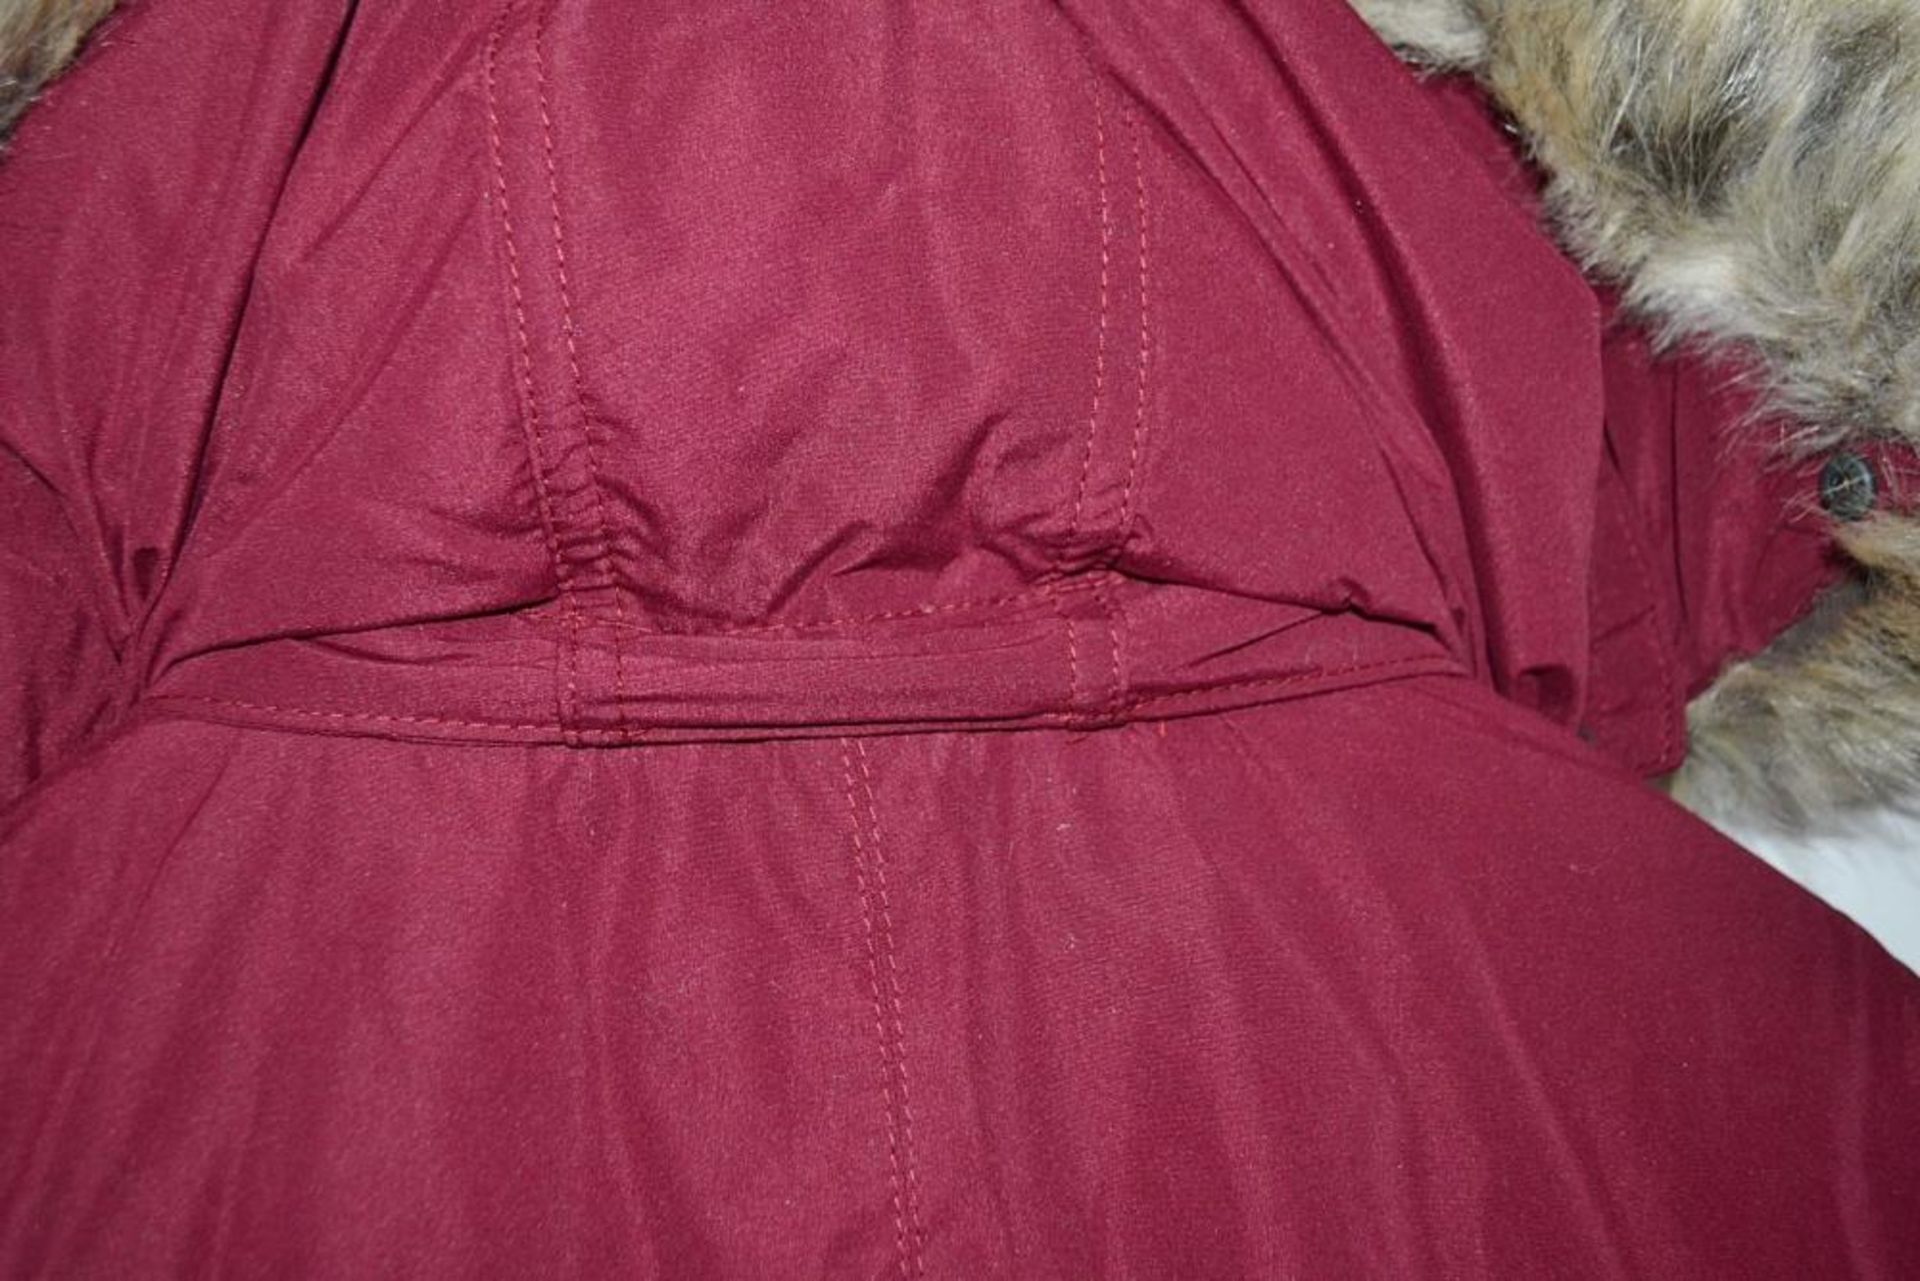 1 x Premium Branded Womens Winter Coat - Wind Proof & Water Resistant - Colour: Burgundy - UK Size 1 - Image 9 of 14